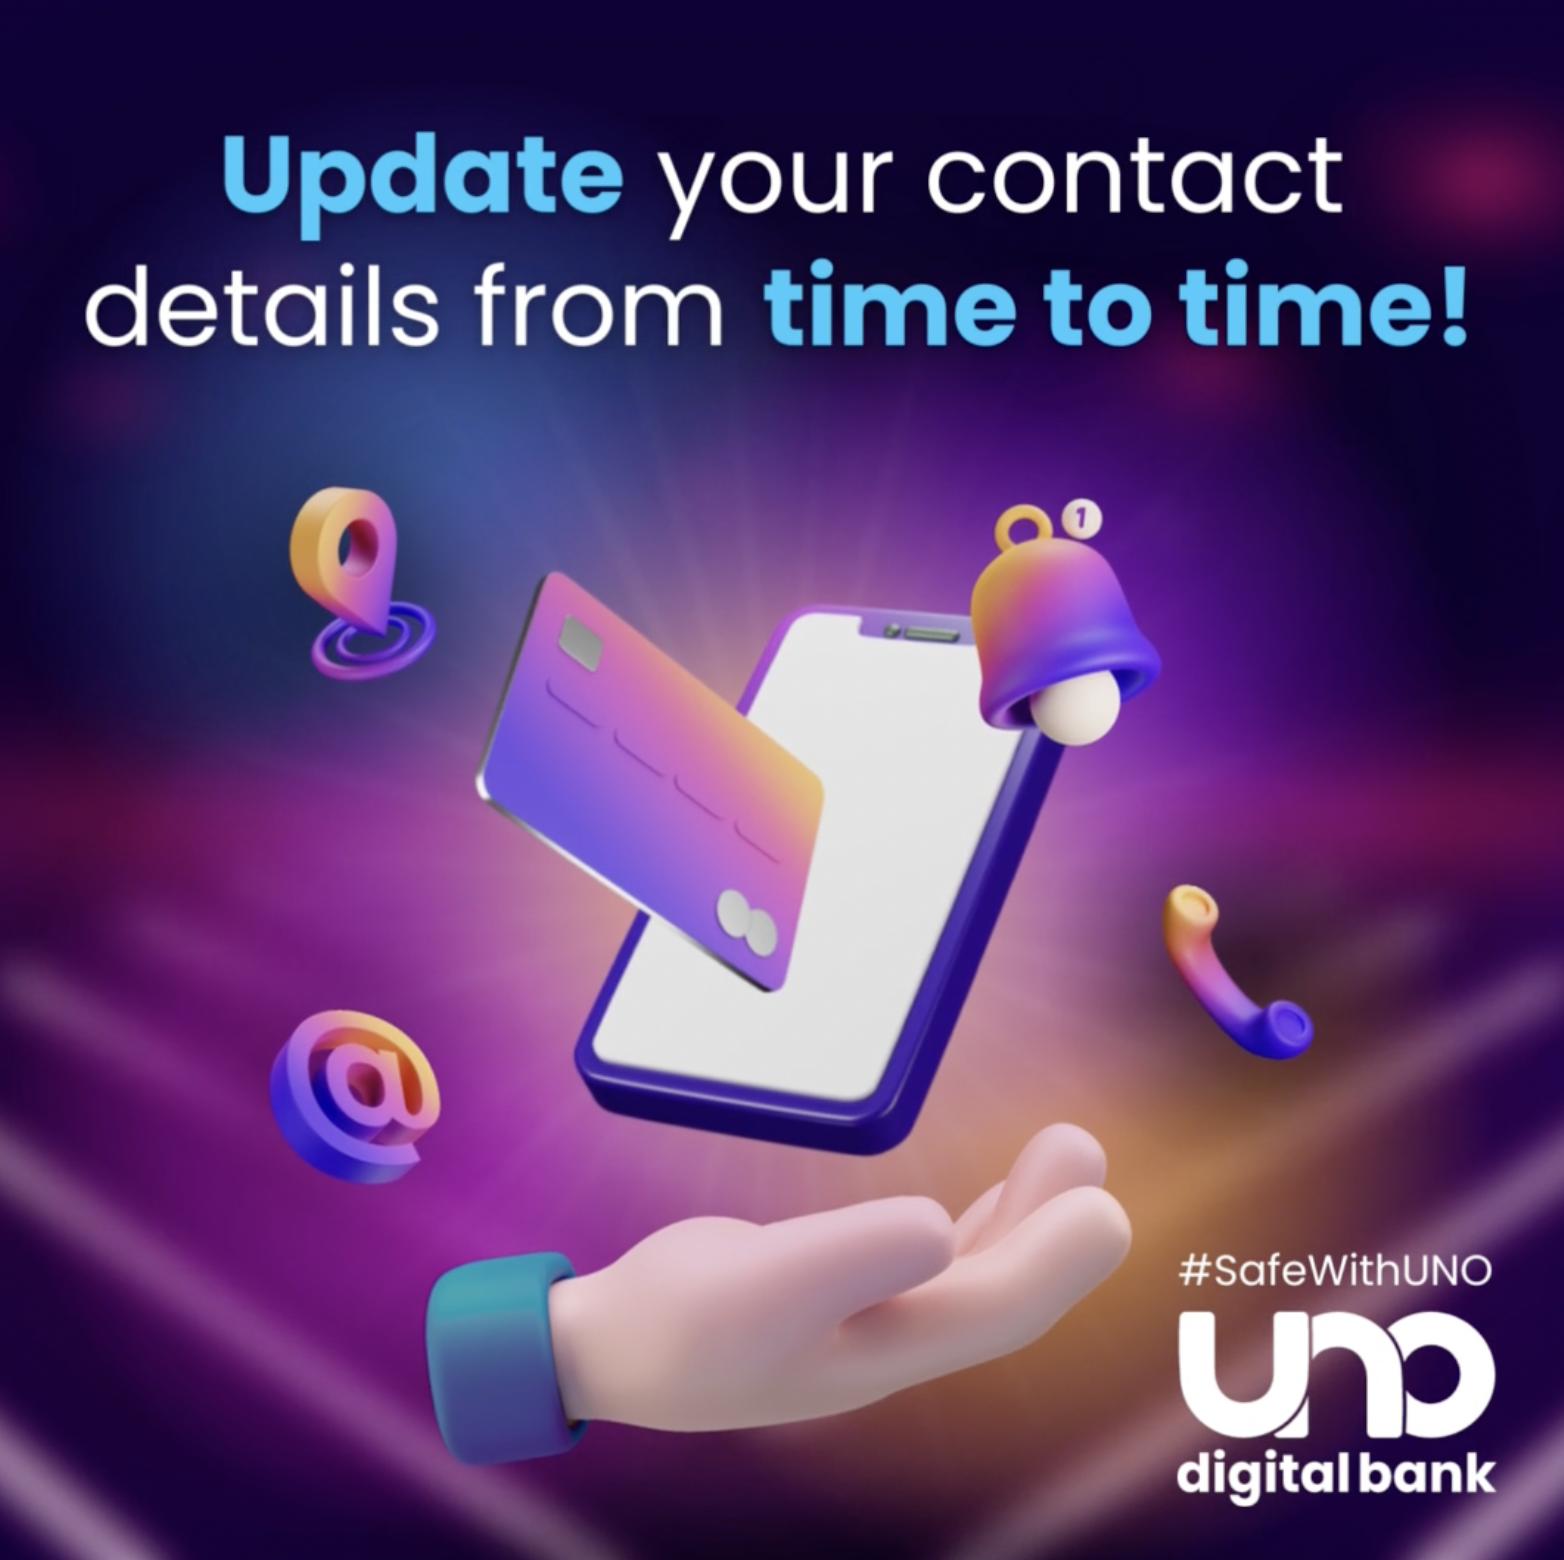 Update your contact details from time to time